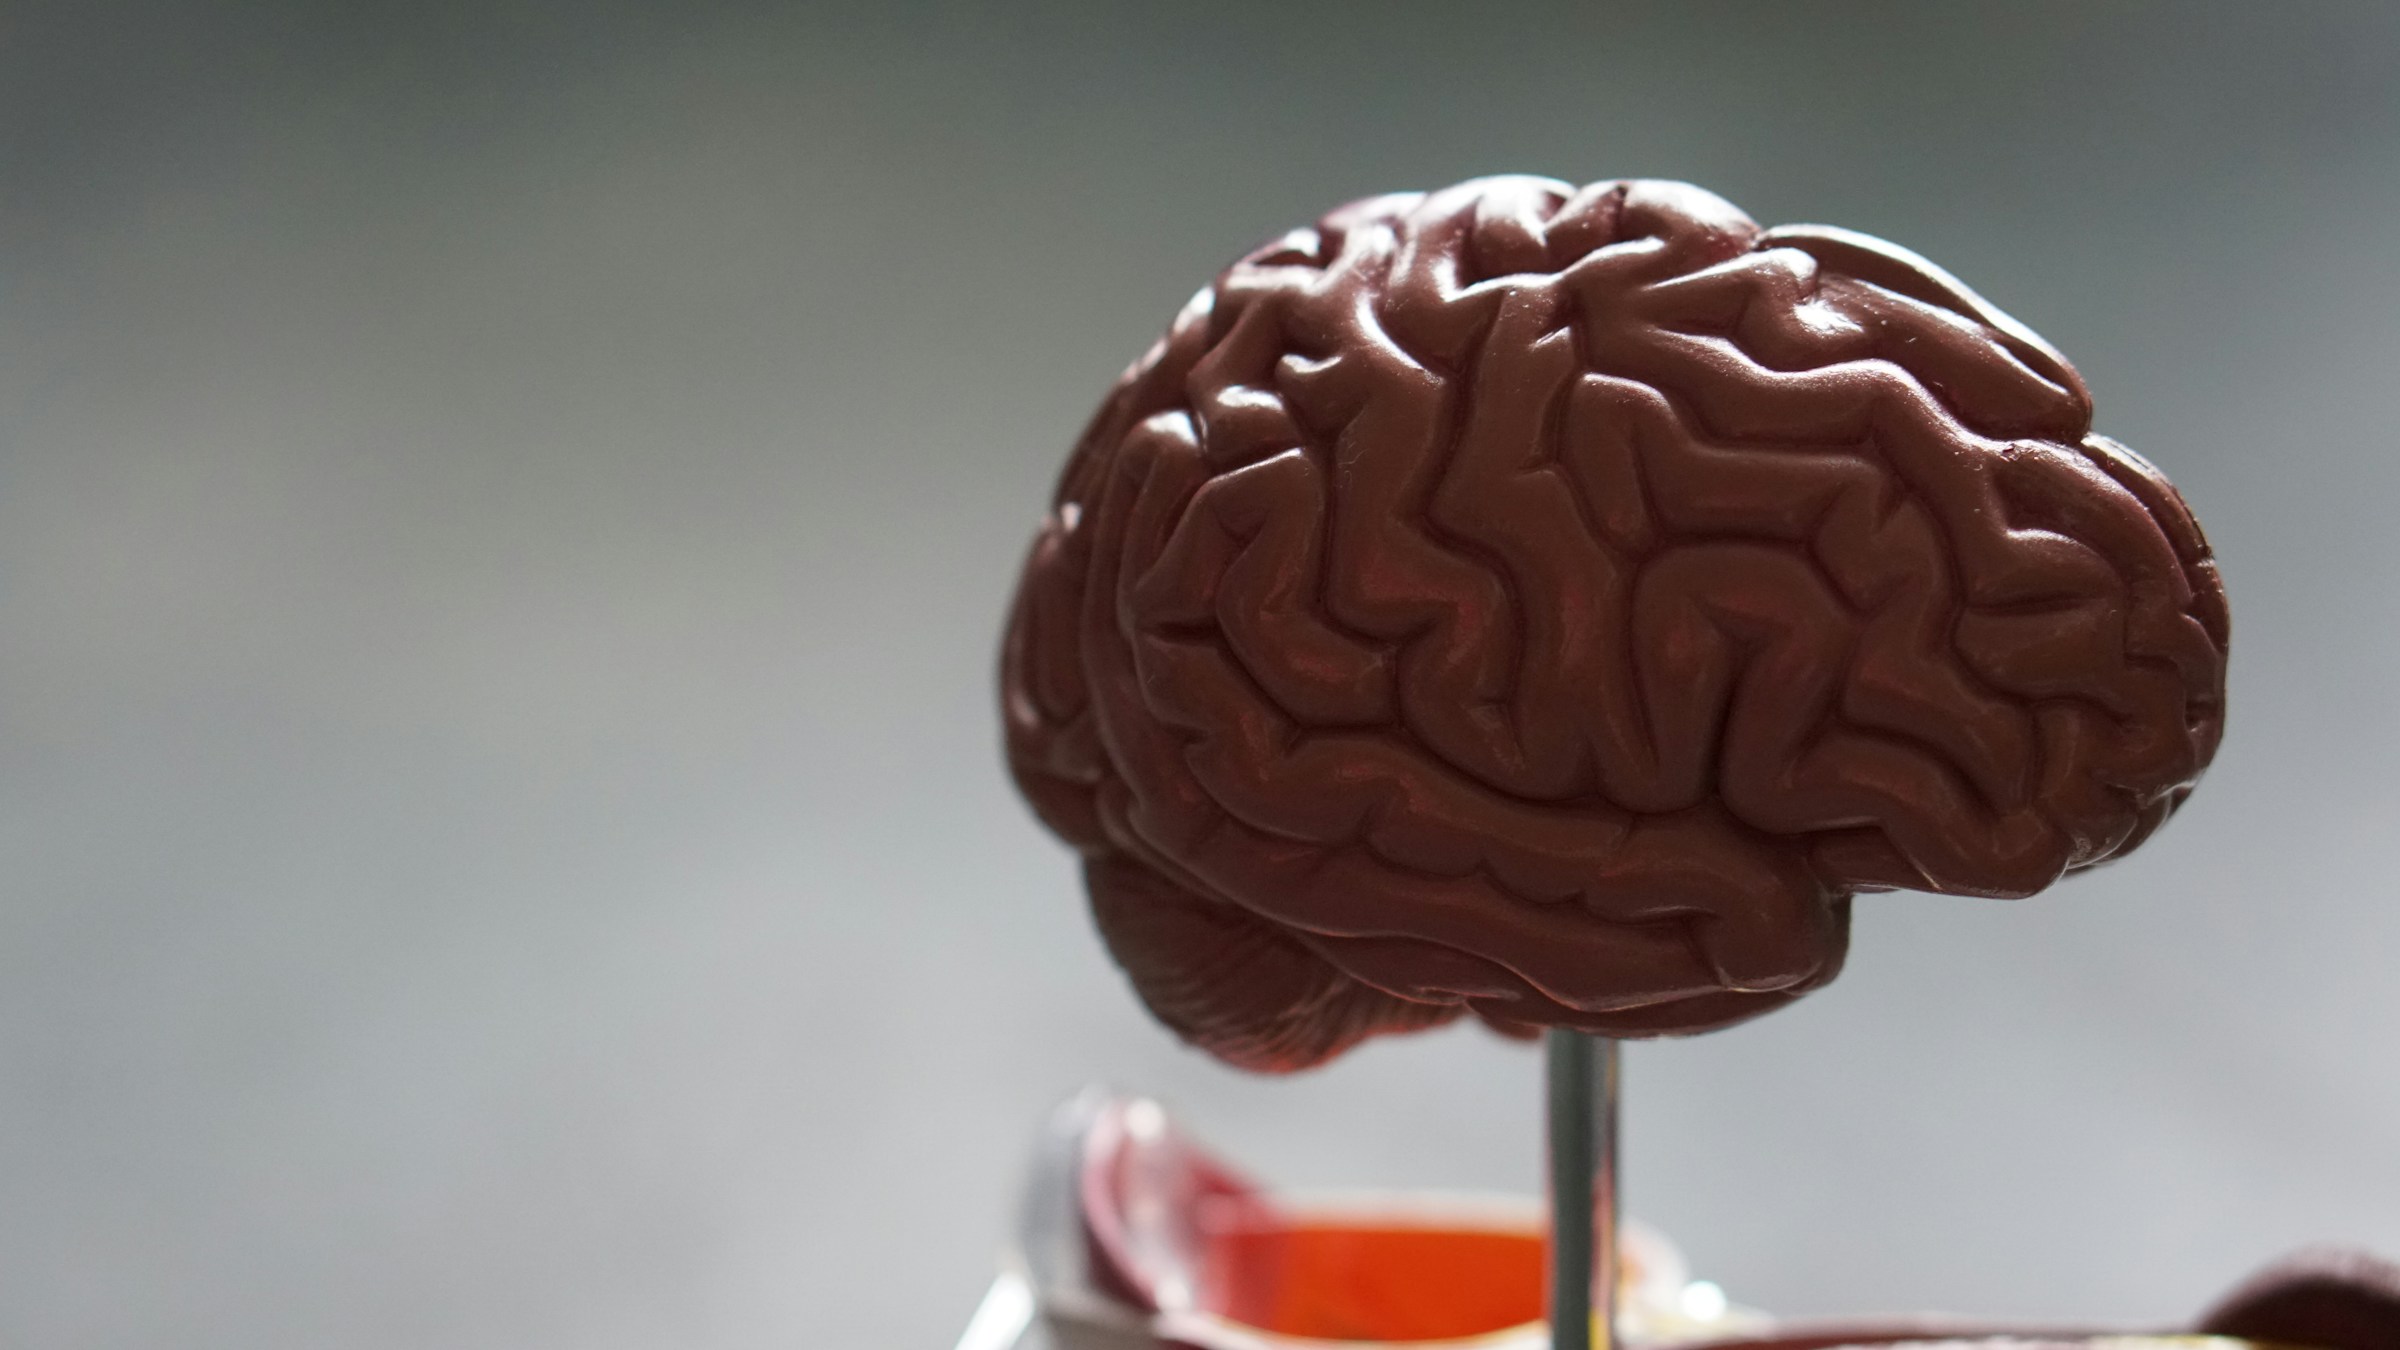 A fake display brain sits on top of a surface in front of a white background.